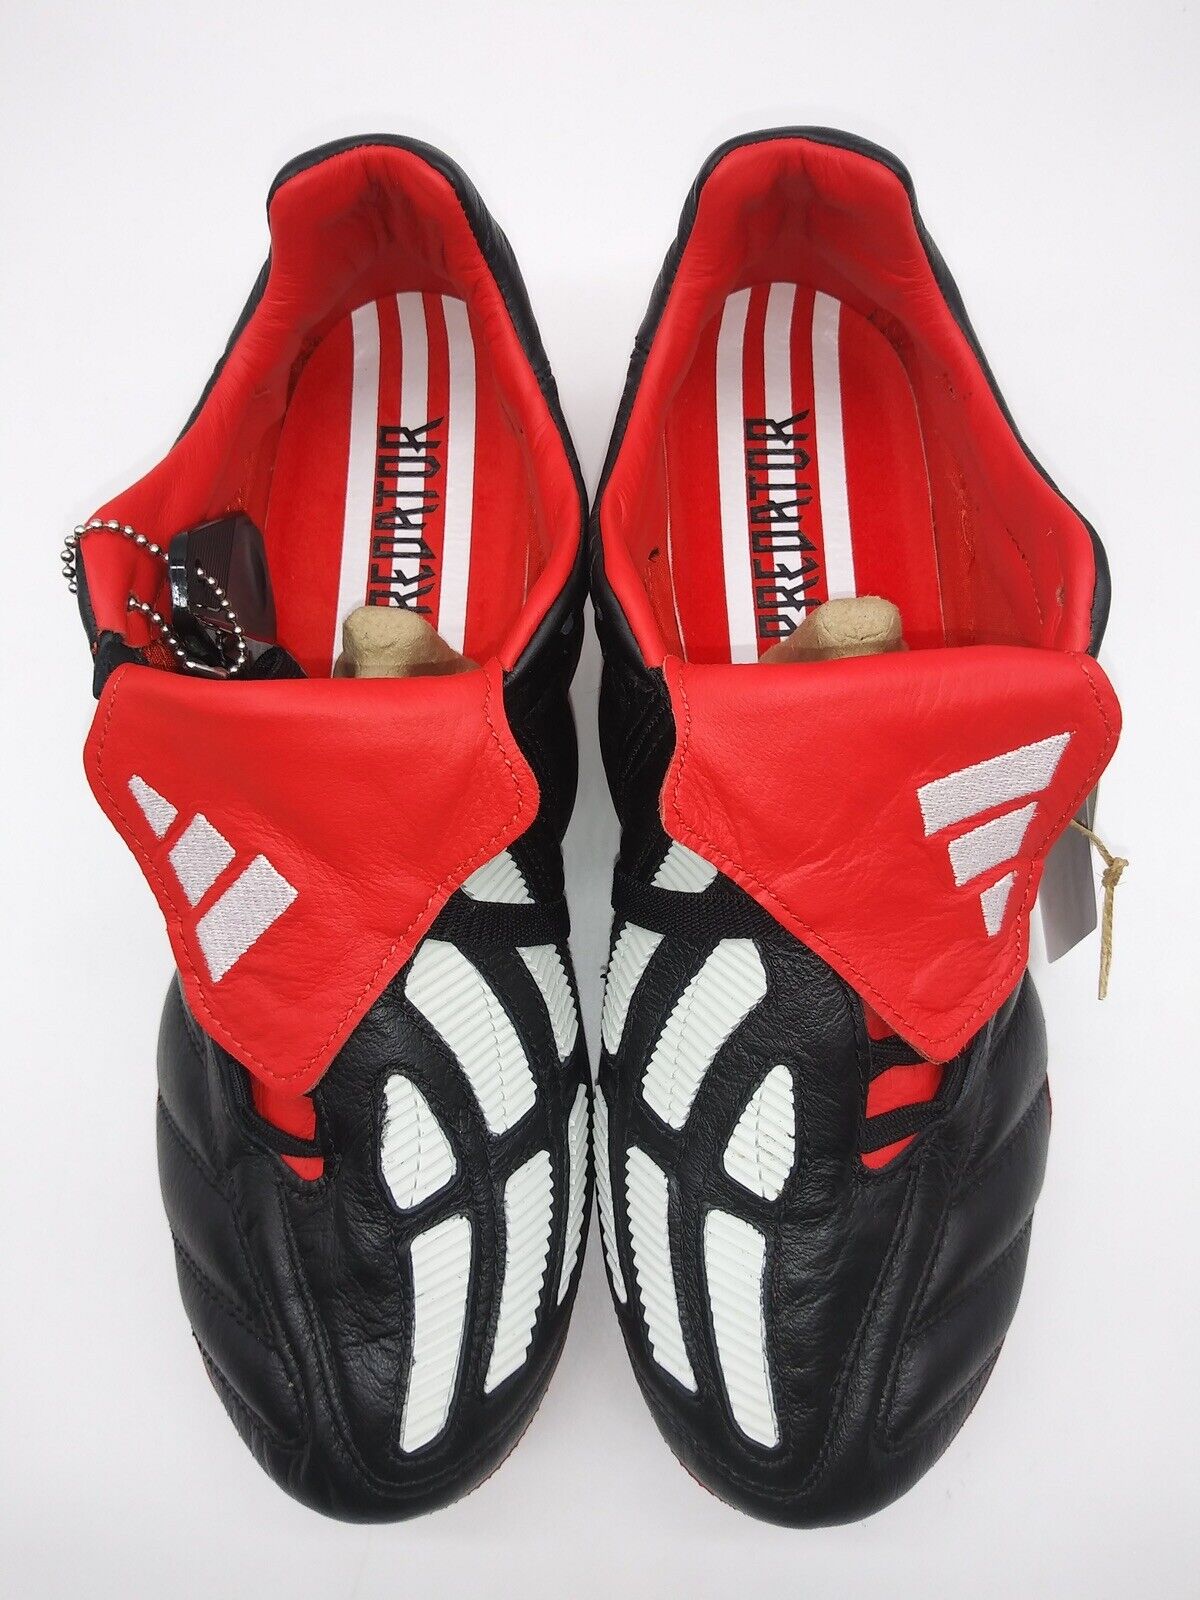 Adidas Predator Mania SG Black Red Limited Edition (Only 2002 Pairs Wo ...